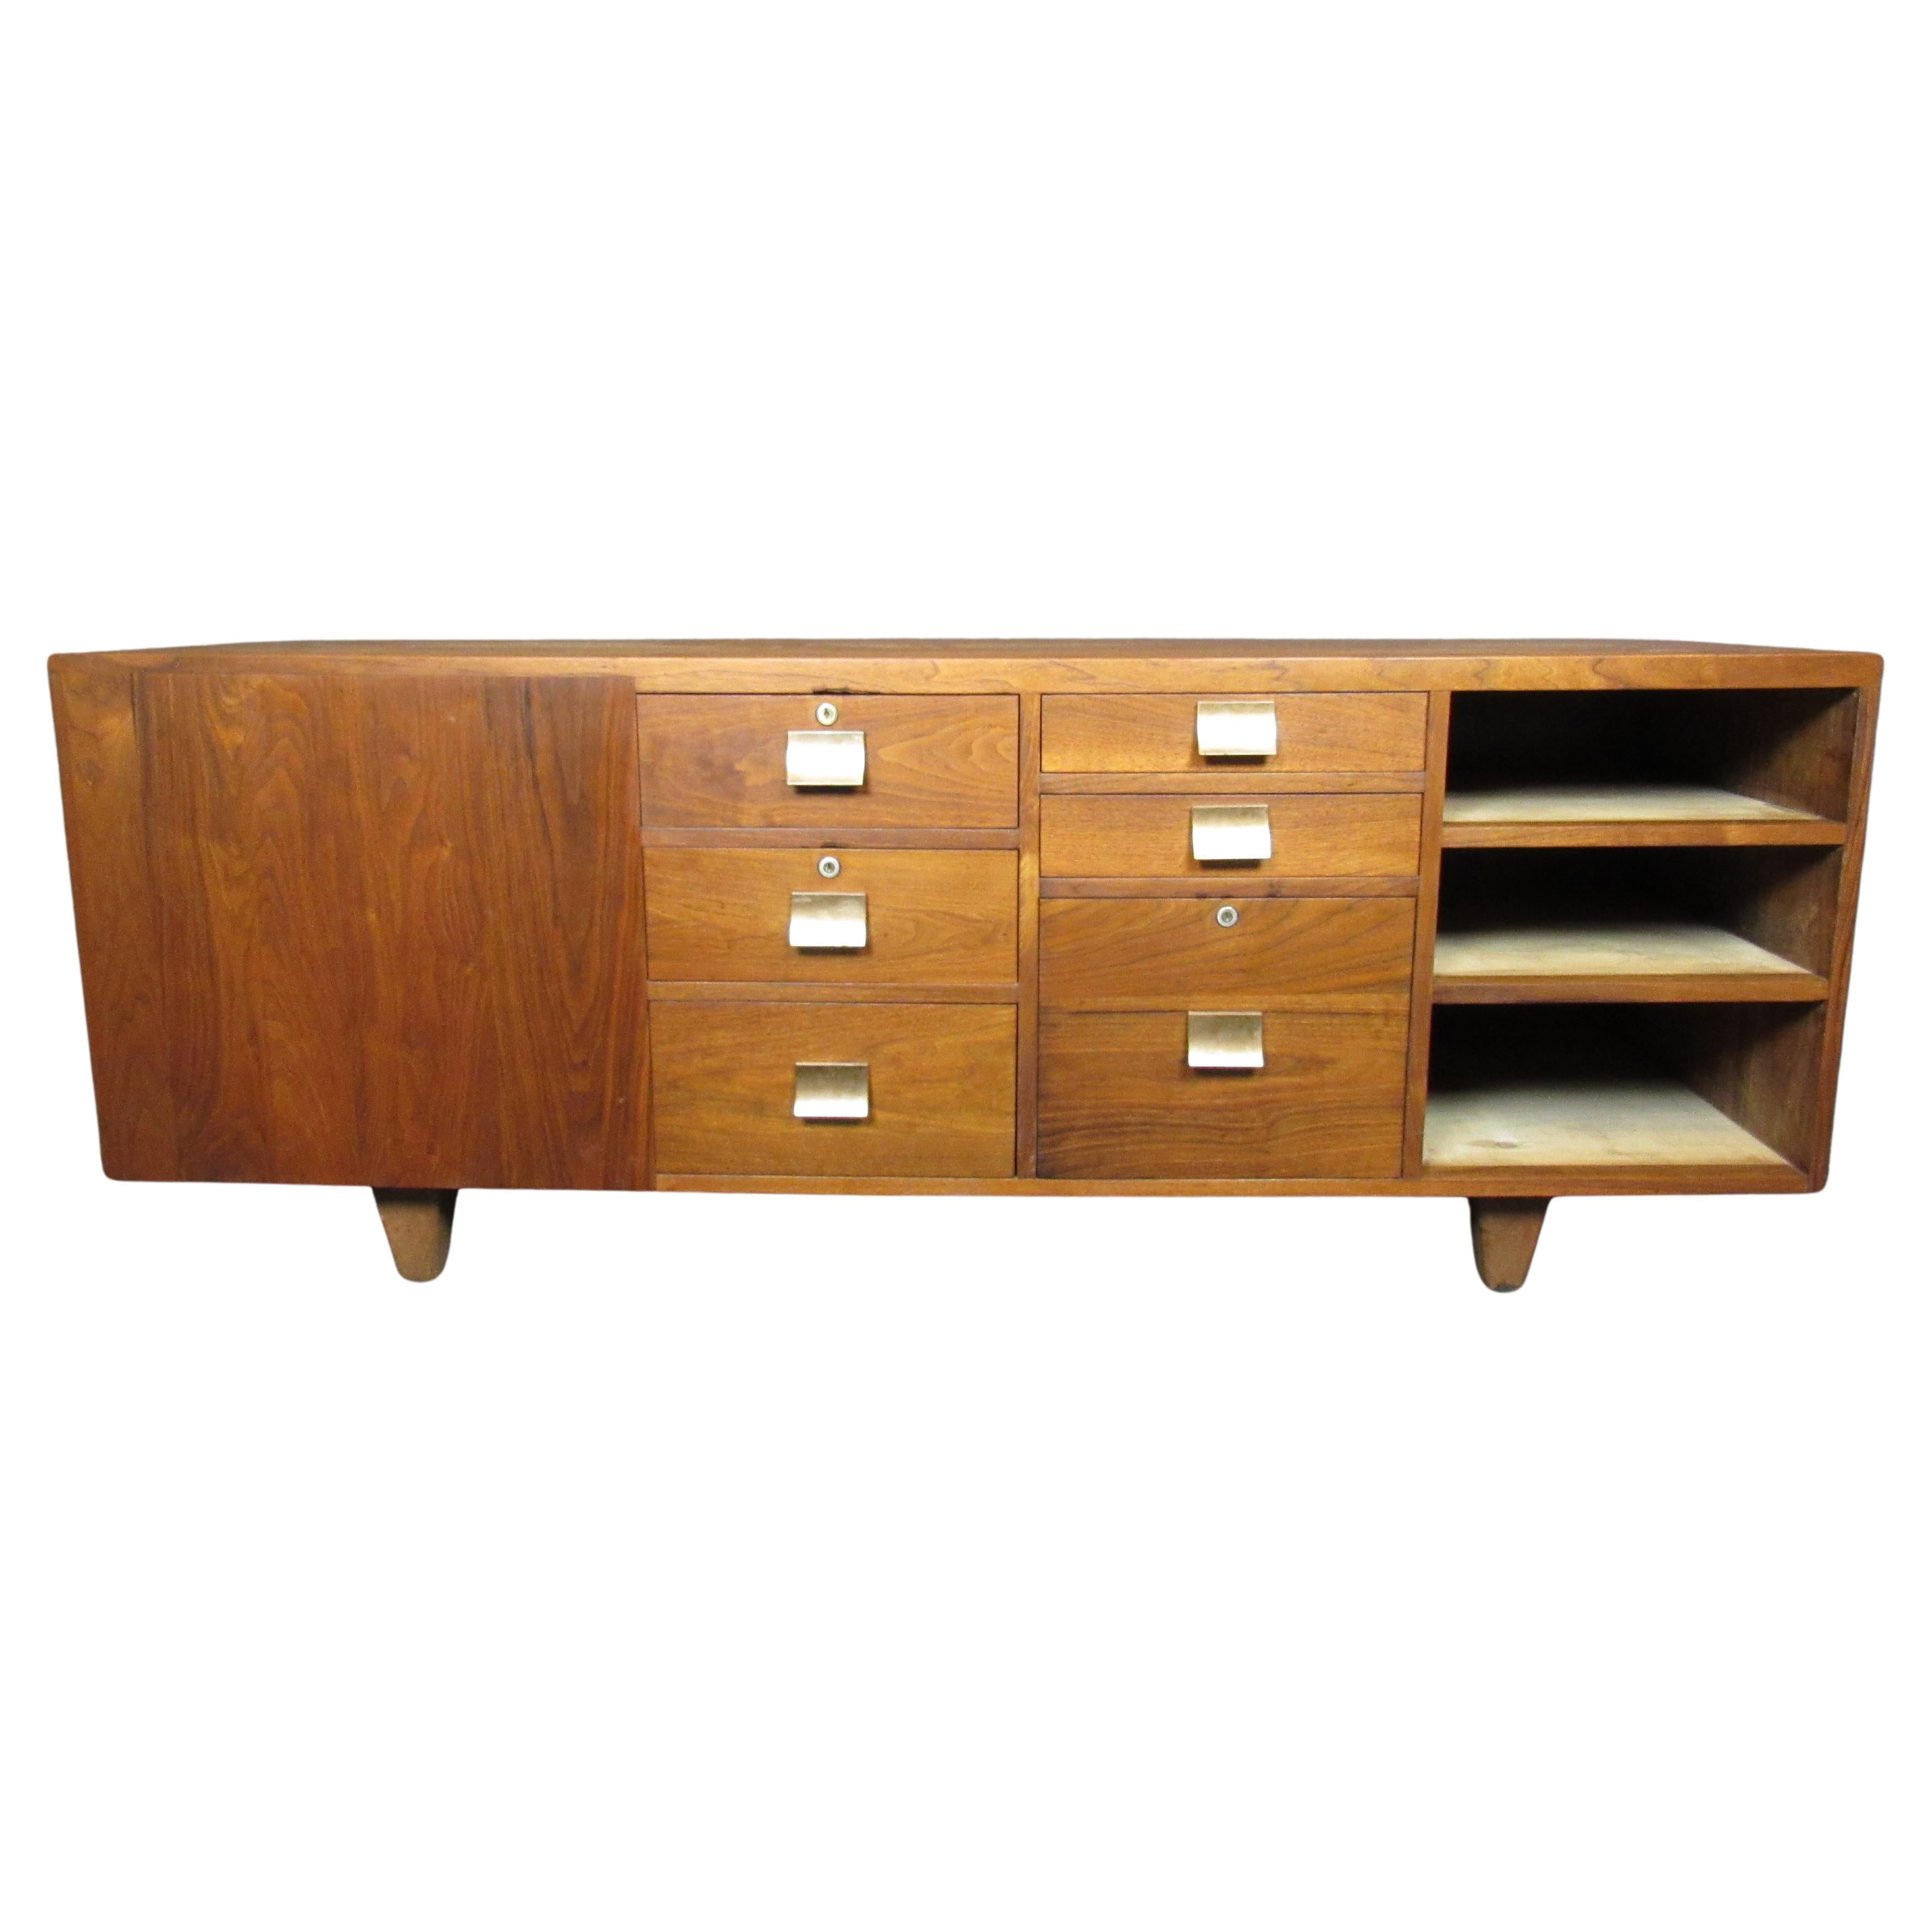 Very nice large-sized credenza sure to be a practical statement piece in your living space. Six large front drawers with three open shelves, as well as a deep side cabinet for ample storage and lots of organizational options. 
Please confirm item